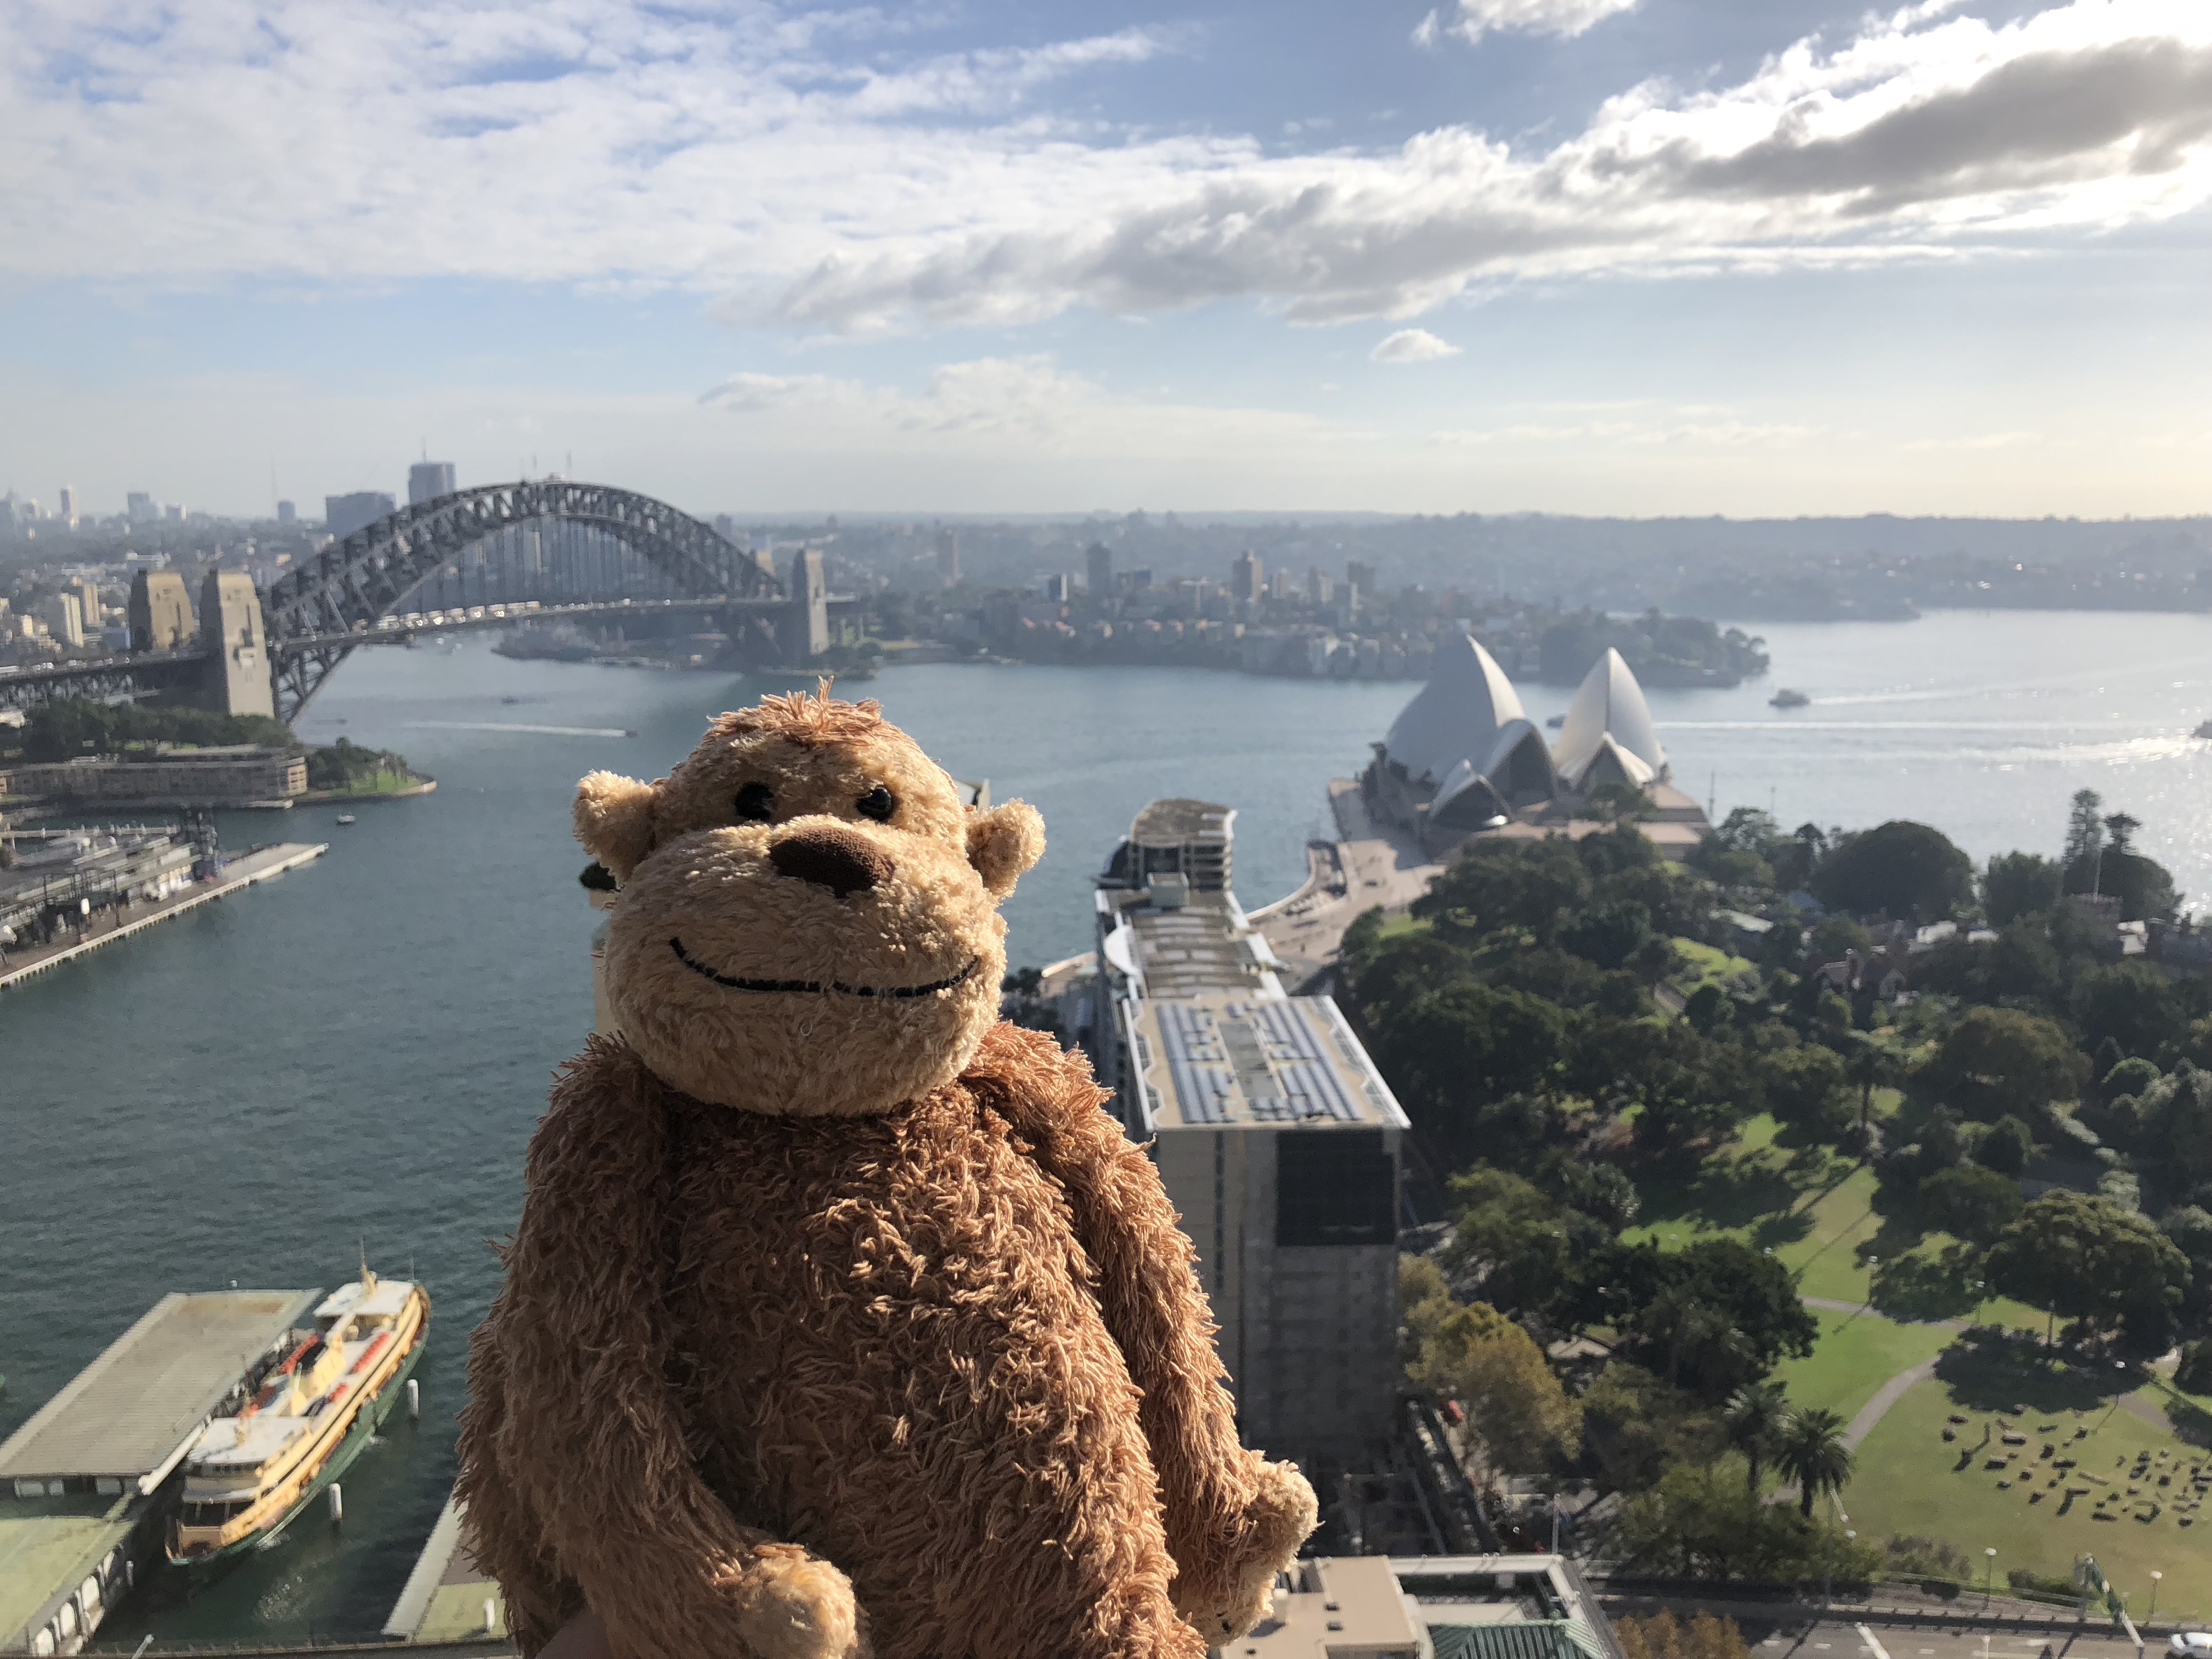 a stuffed animal standing on a ledge overlooking a city